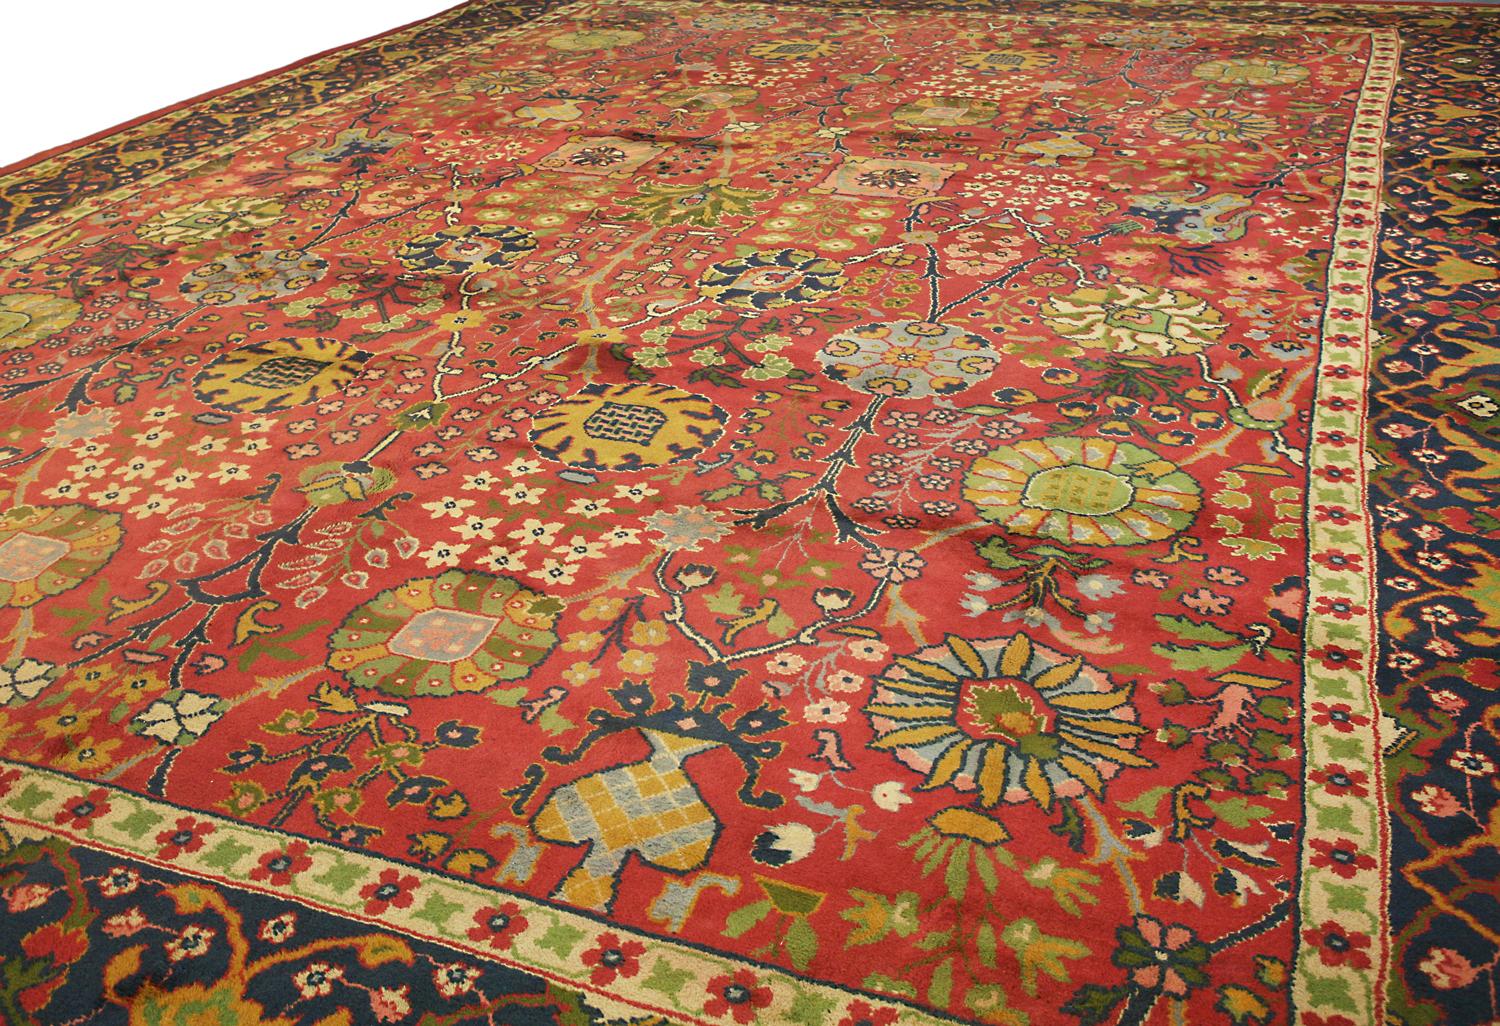 A luxurious royal carpet with a stylized motif design and all over field. This carpet comes from the most beautiful part of Ireland, Donegal. An area that despite appearing isolated has been able to maintain its traditions like weaving rugs. The